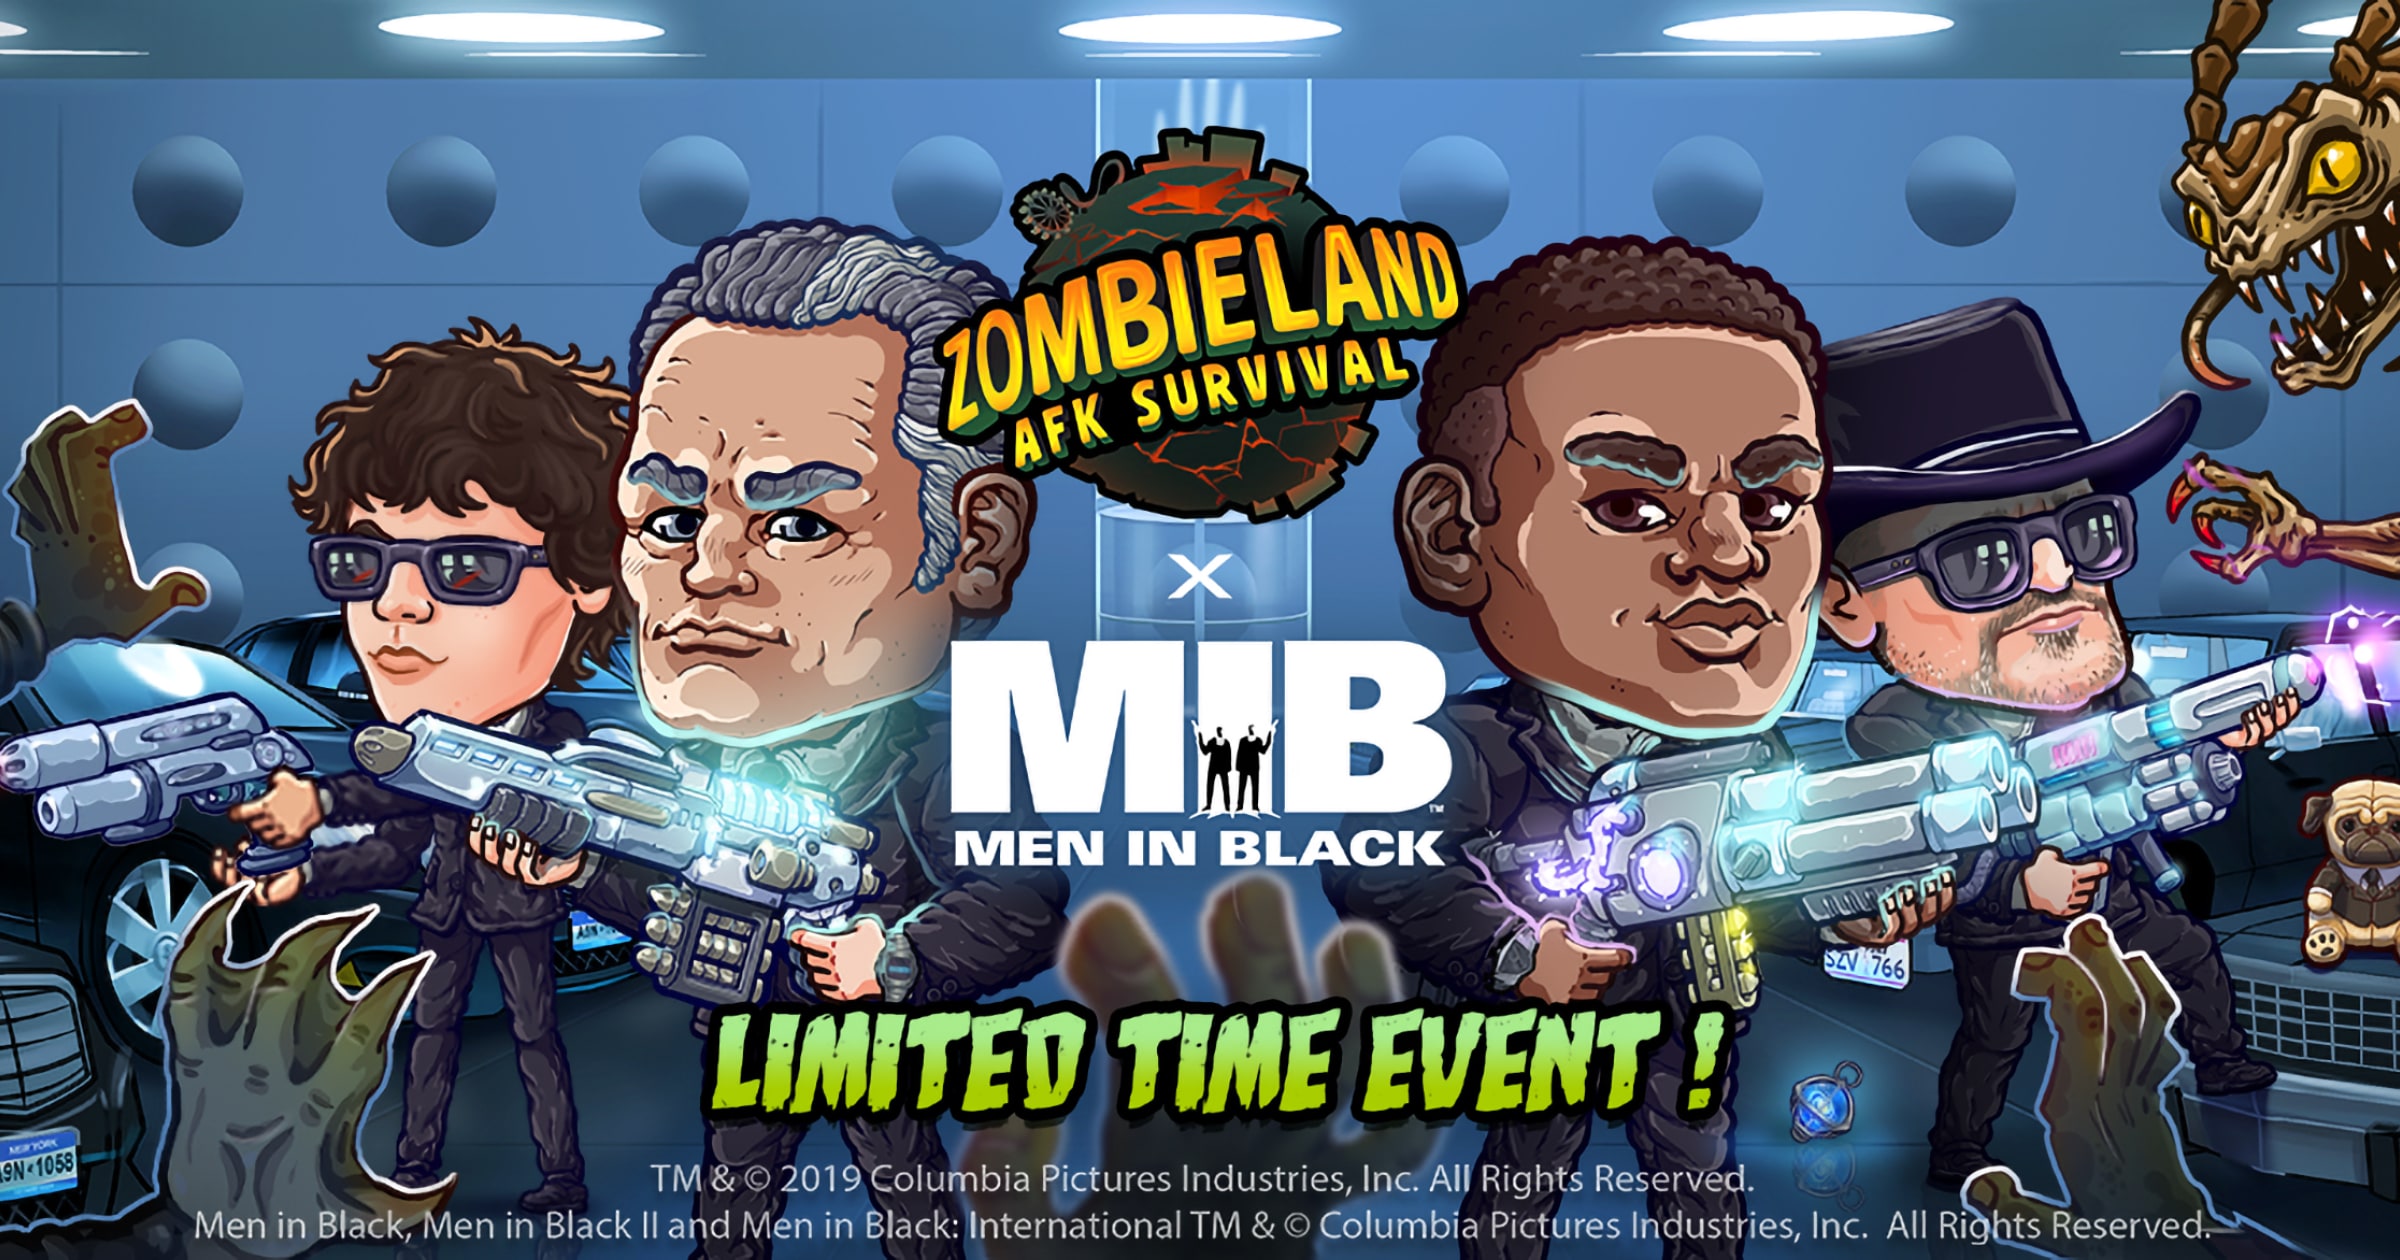 Men In Black Characters Arrive in ‘Zombieland: AFK Survival’ Game